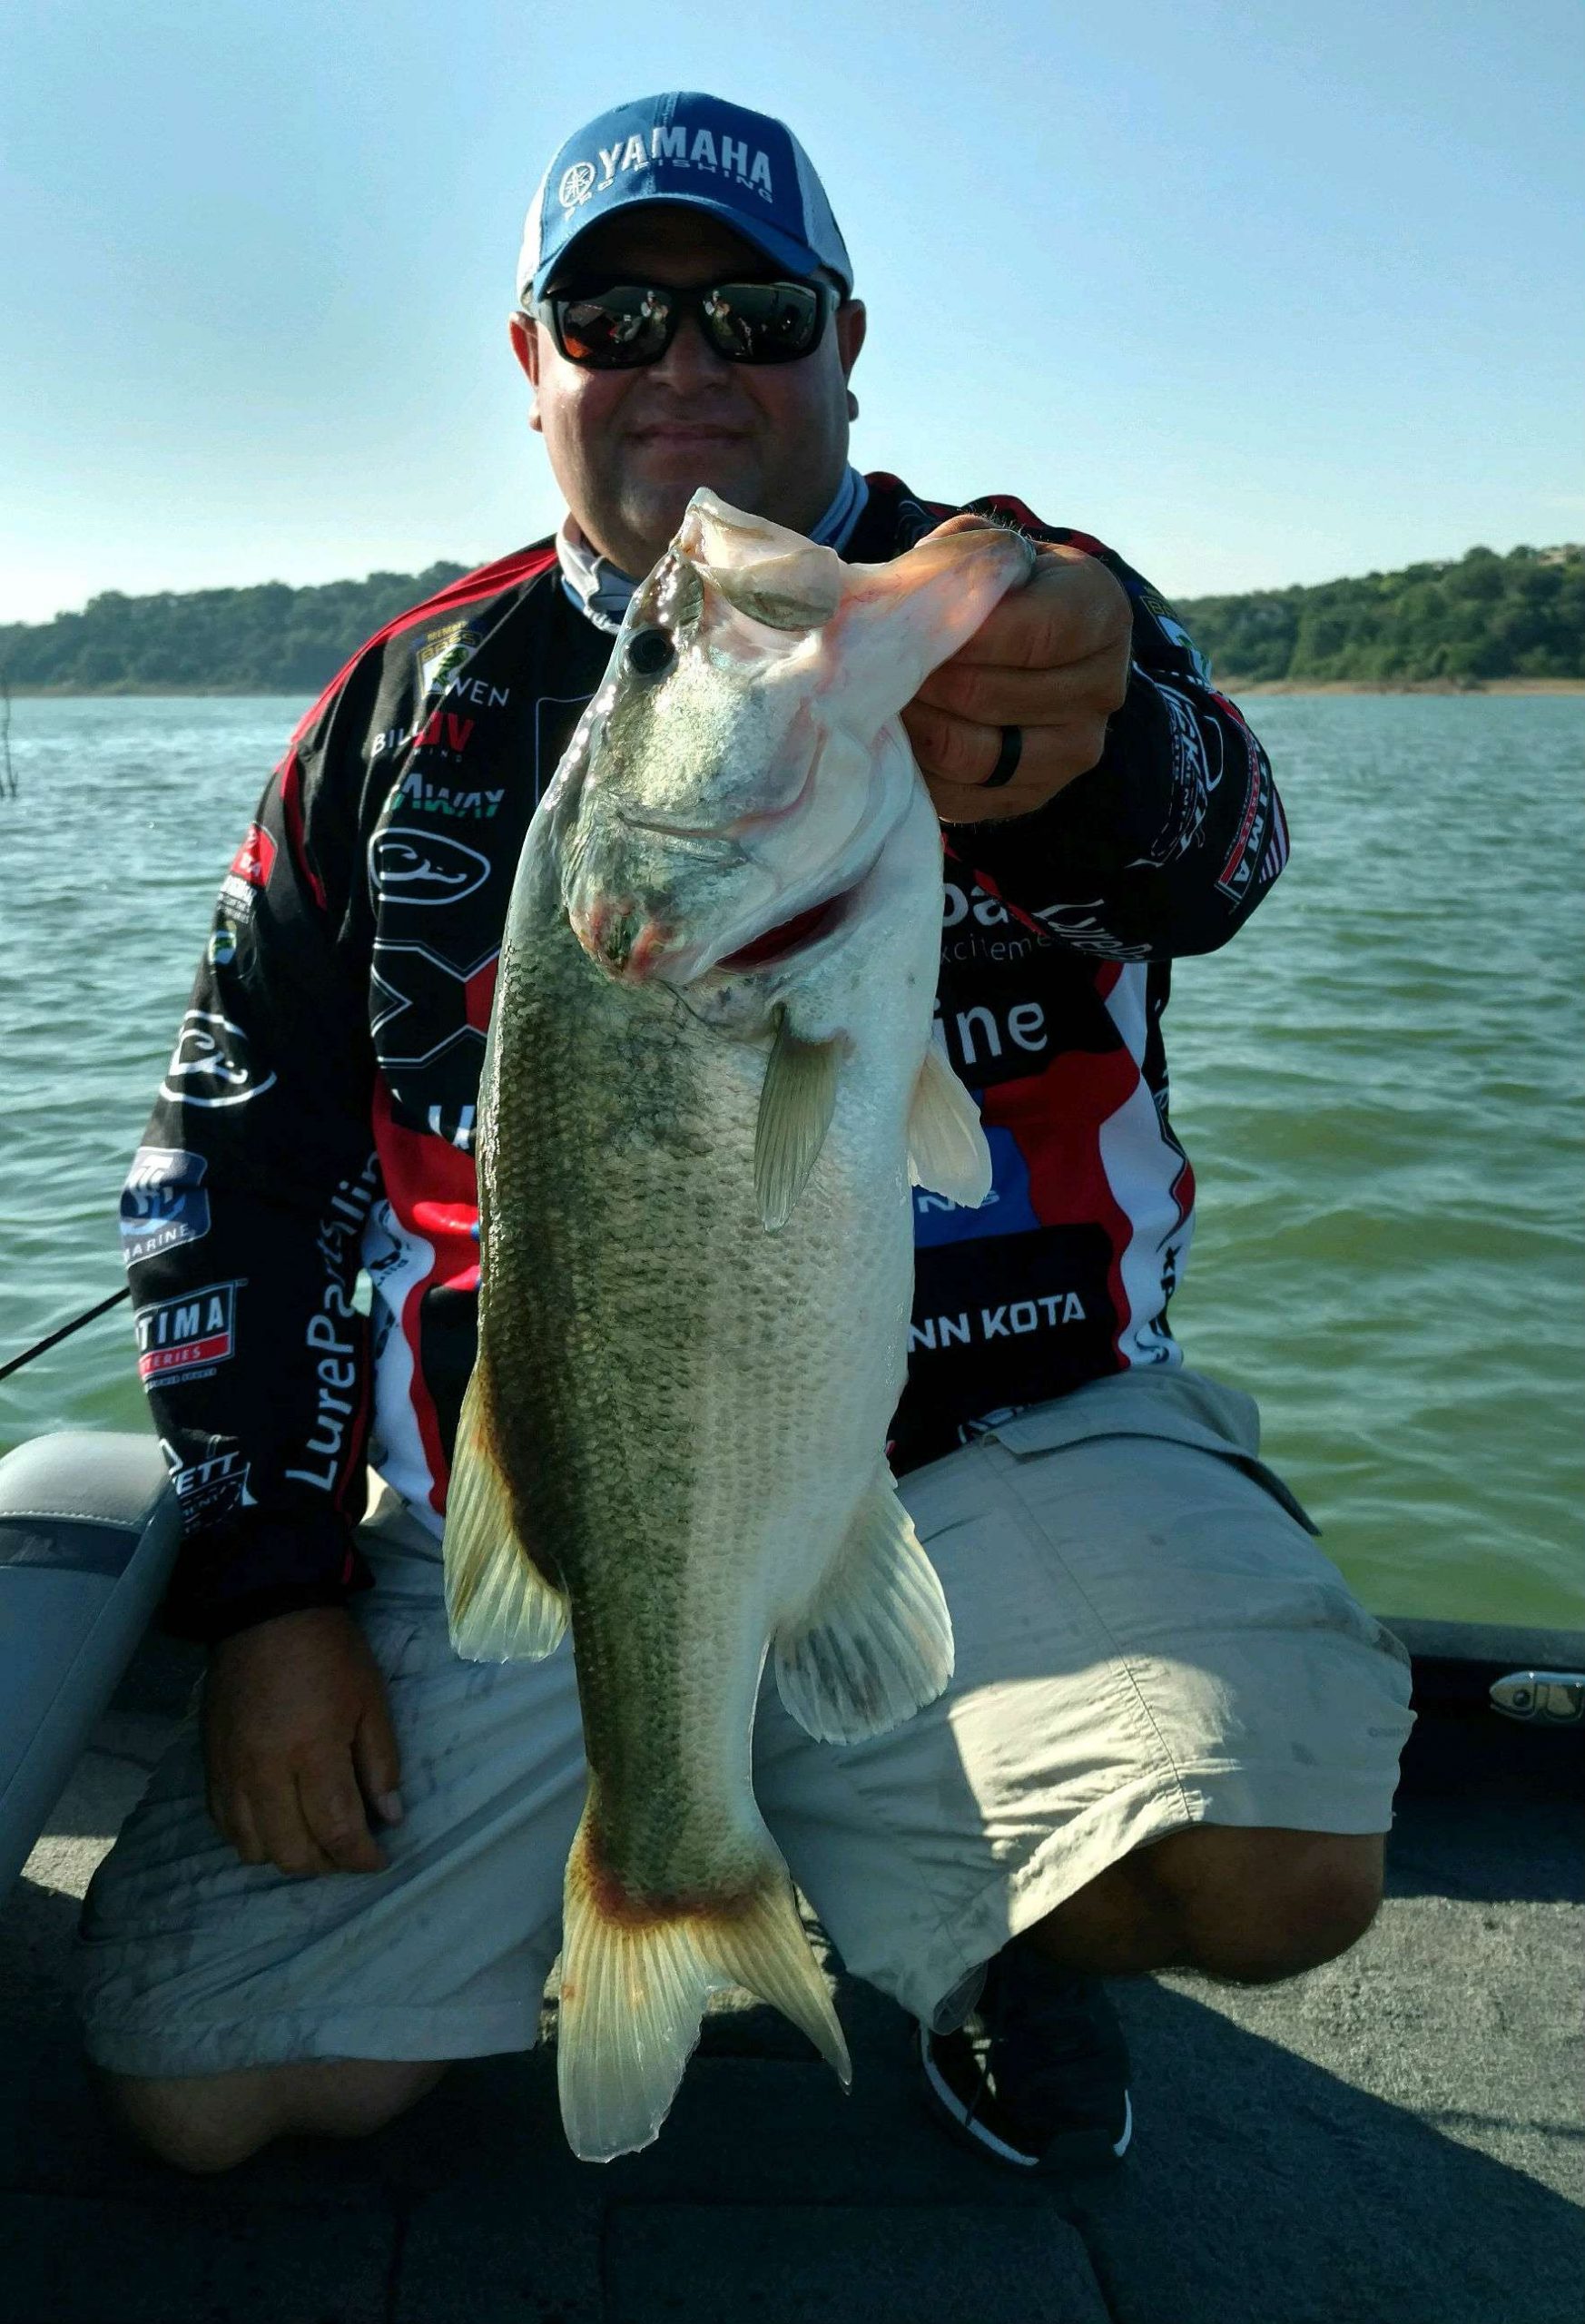 Bill Lowen misses a big one then three minutes later nails a nice 4-pounder.